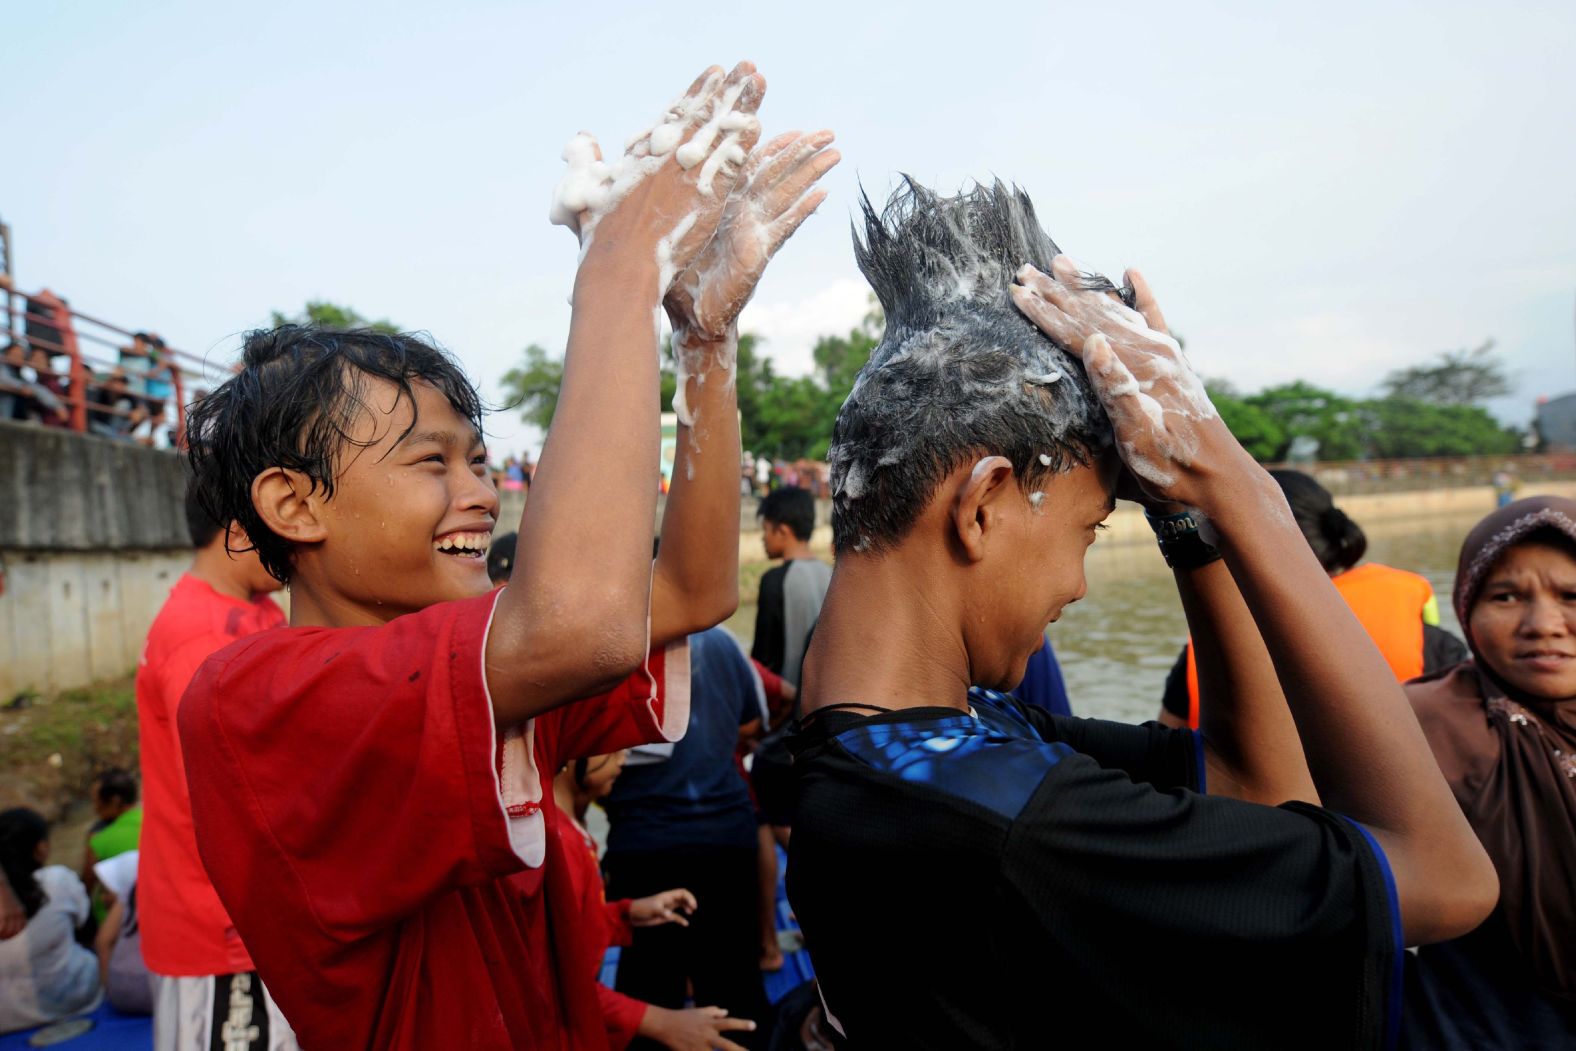 Indonesians washing as part of the "padusan" traditional ritual to welcome the holy month of Ramadan in Tangerang, Banten province on May 4. From cleaning up relatives' graves to eating meat together to colorful street parades and rituals, millions of Indonesians are getting ready to welcome Ramadan.